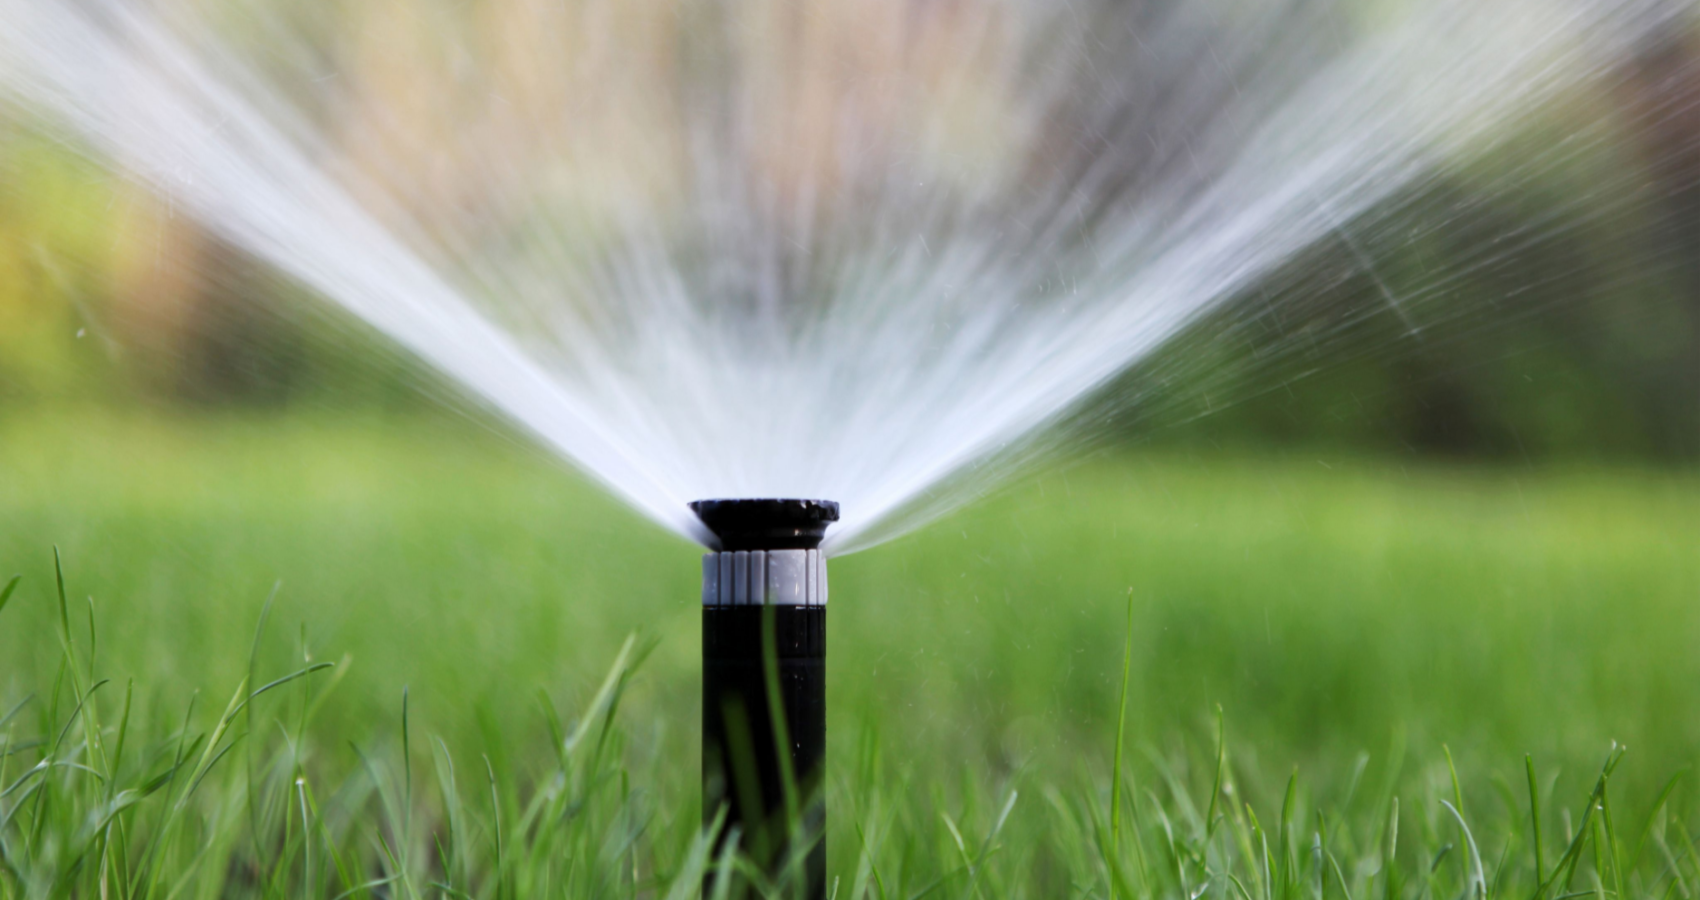 Sprinkler System Installation Winchester, MO | Lawn Care for Winchester, MO Area | Lawn Sprinklers of St. Louis